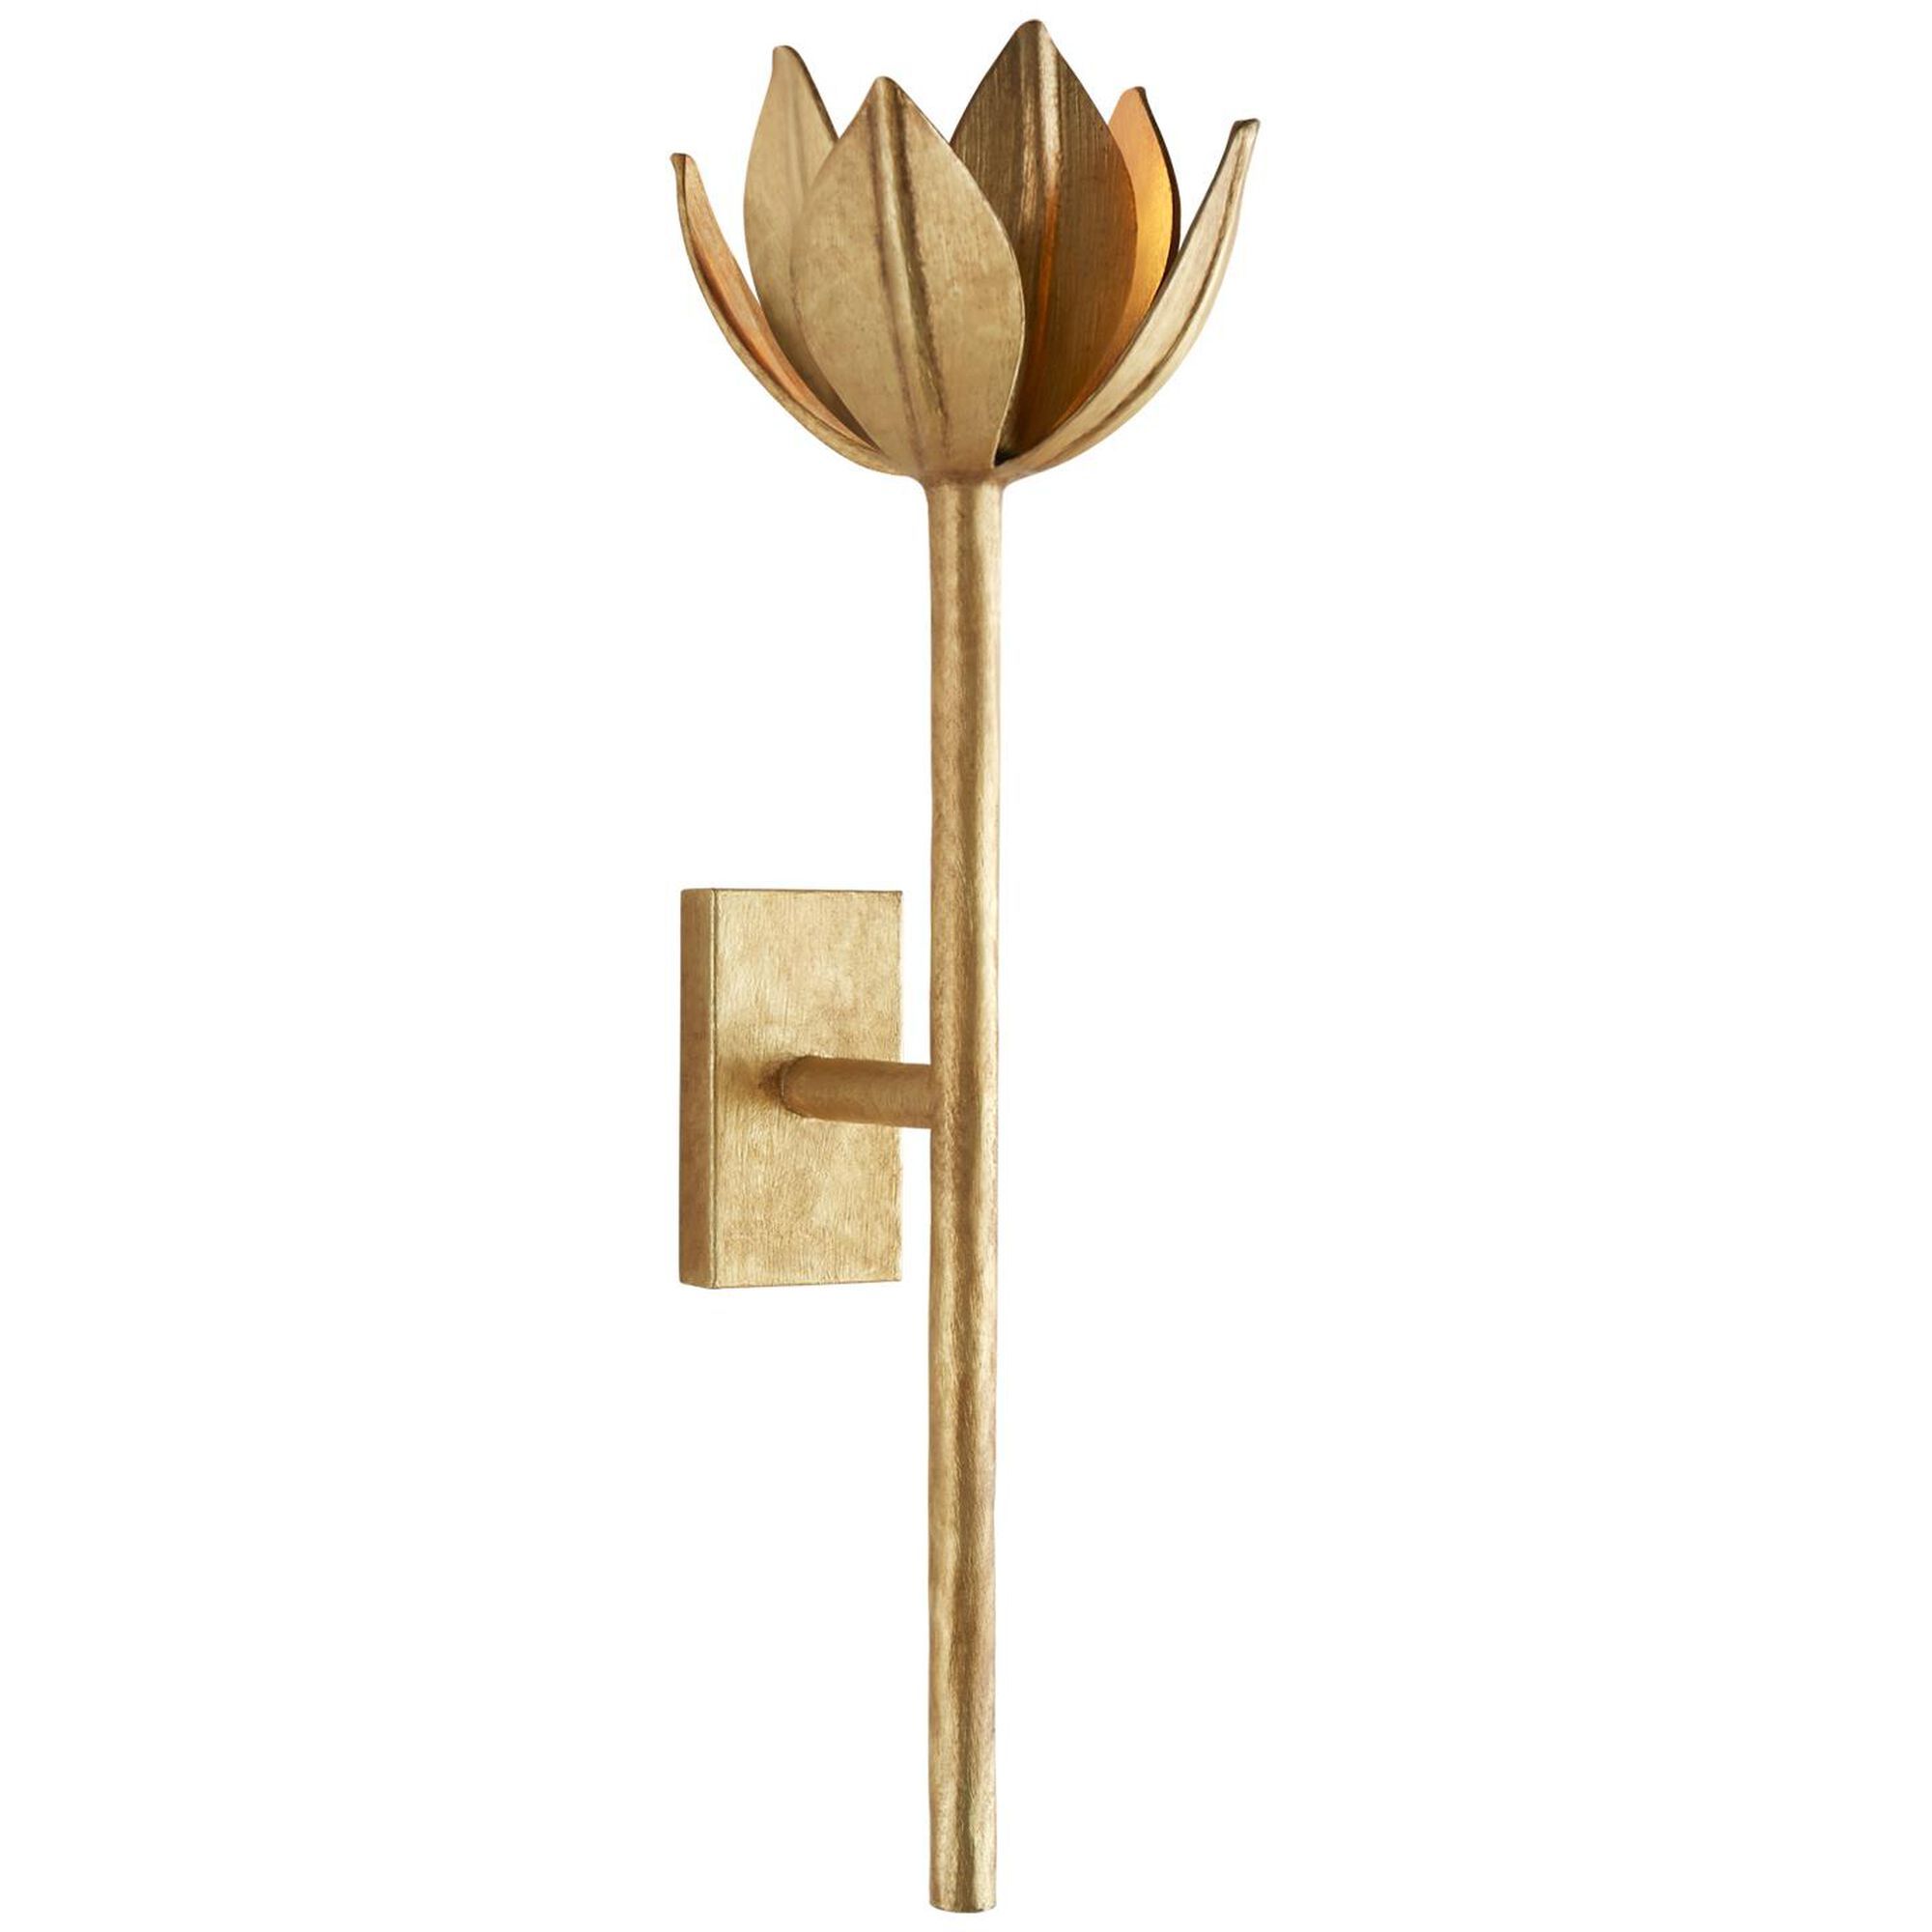 Julie Neill Alberto 21 Inch Wall Sconce by Visual Comfort and Co. | Capitol Lighting 1800lighting.com